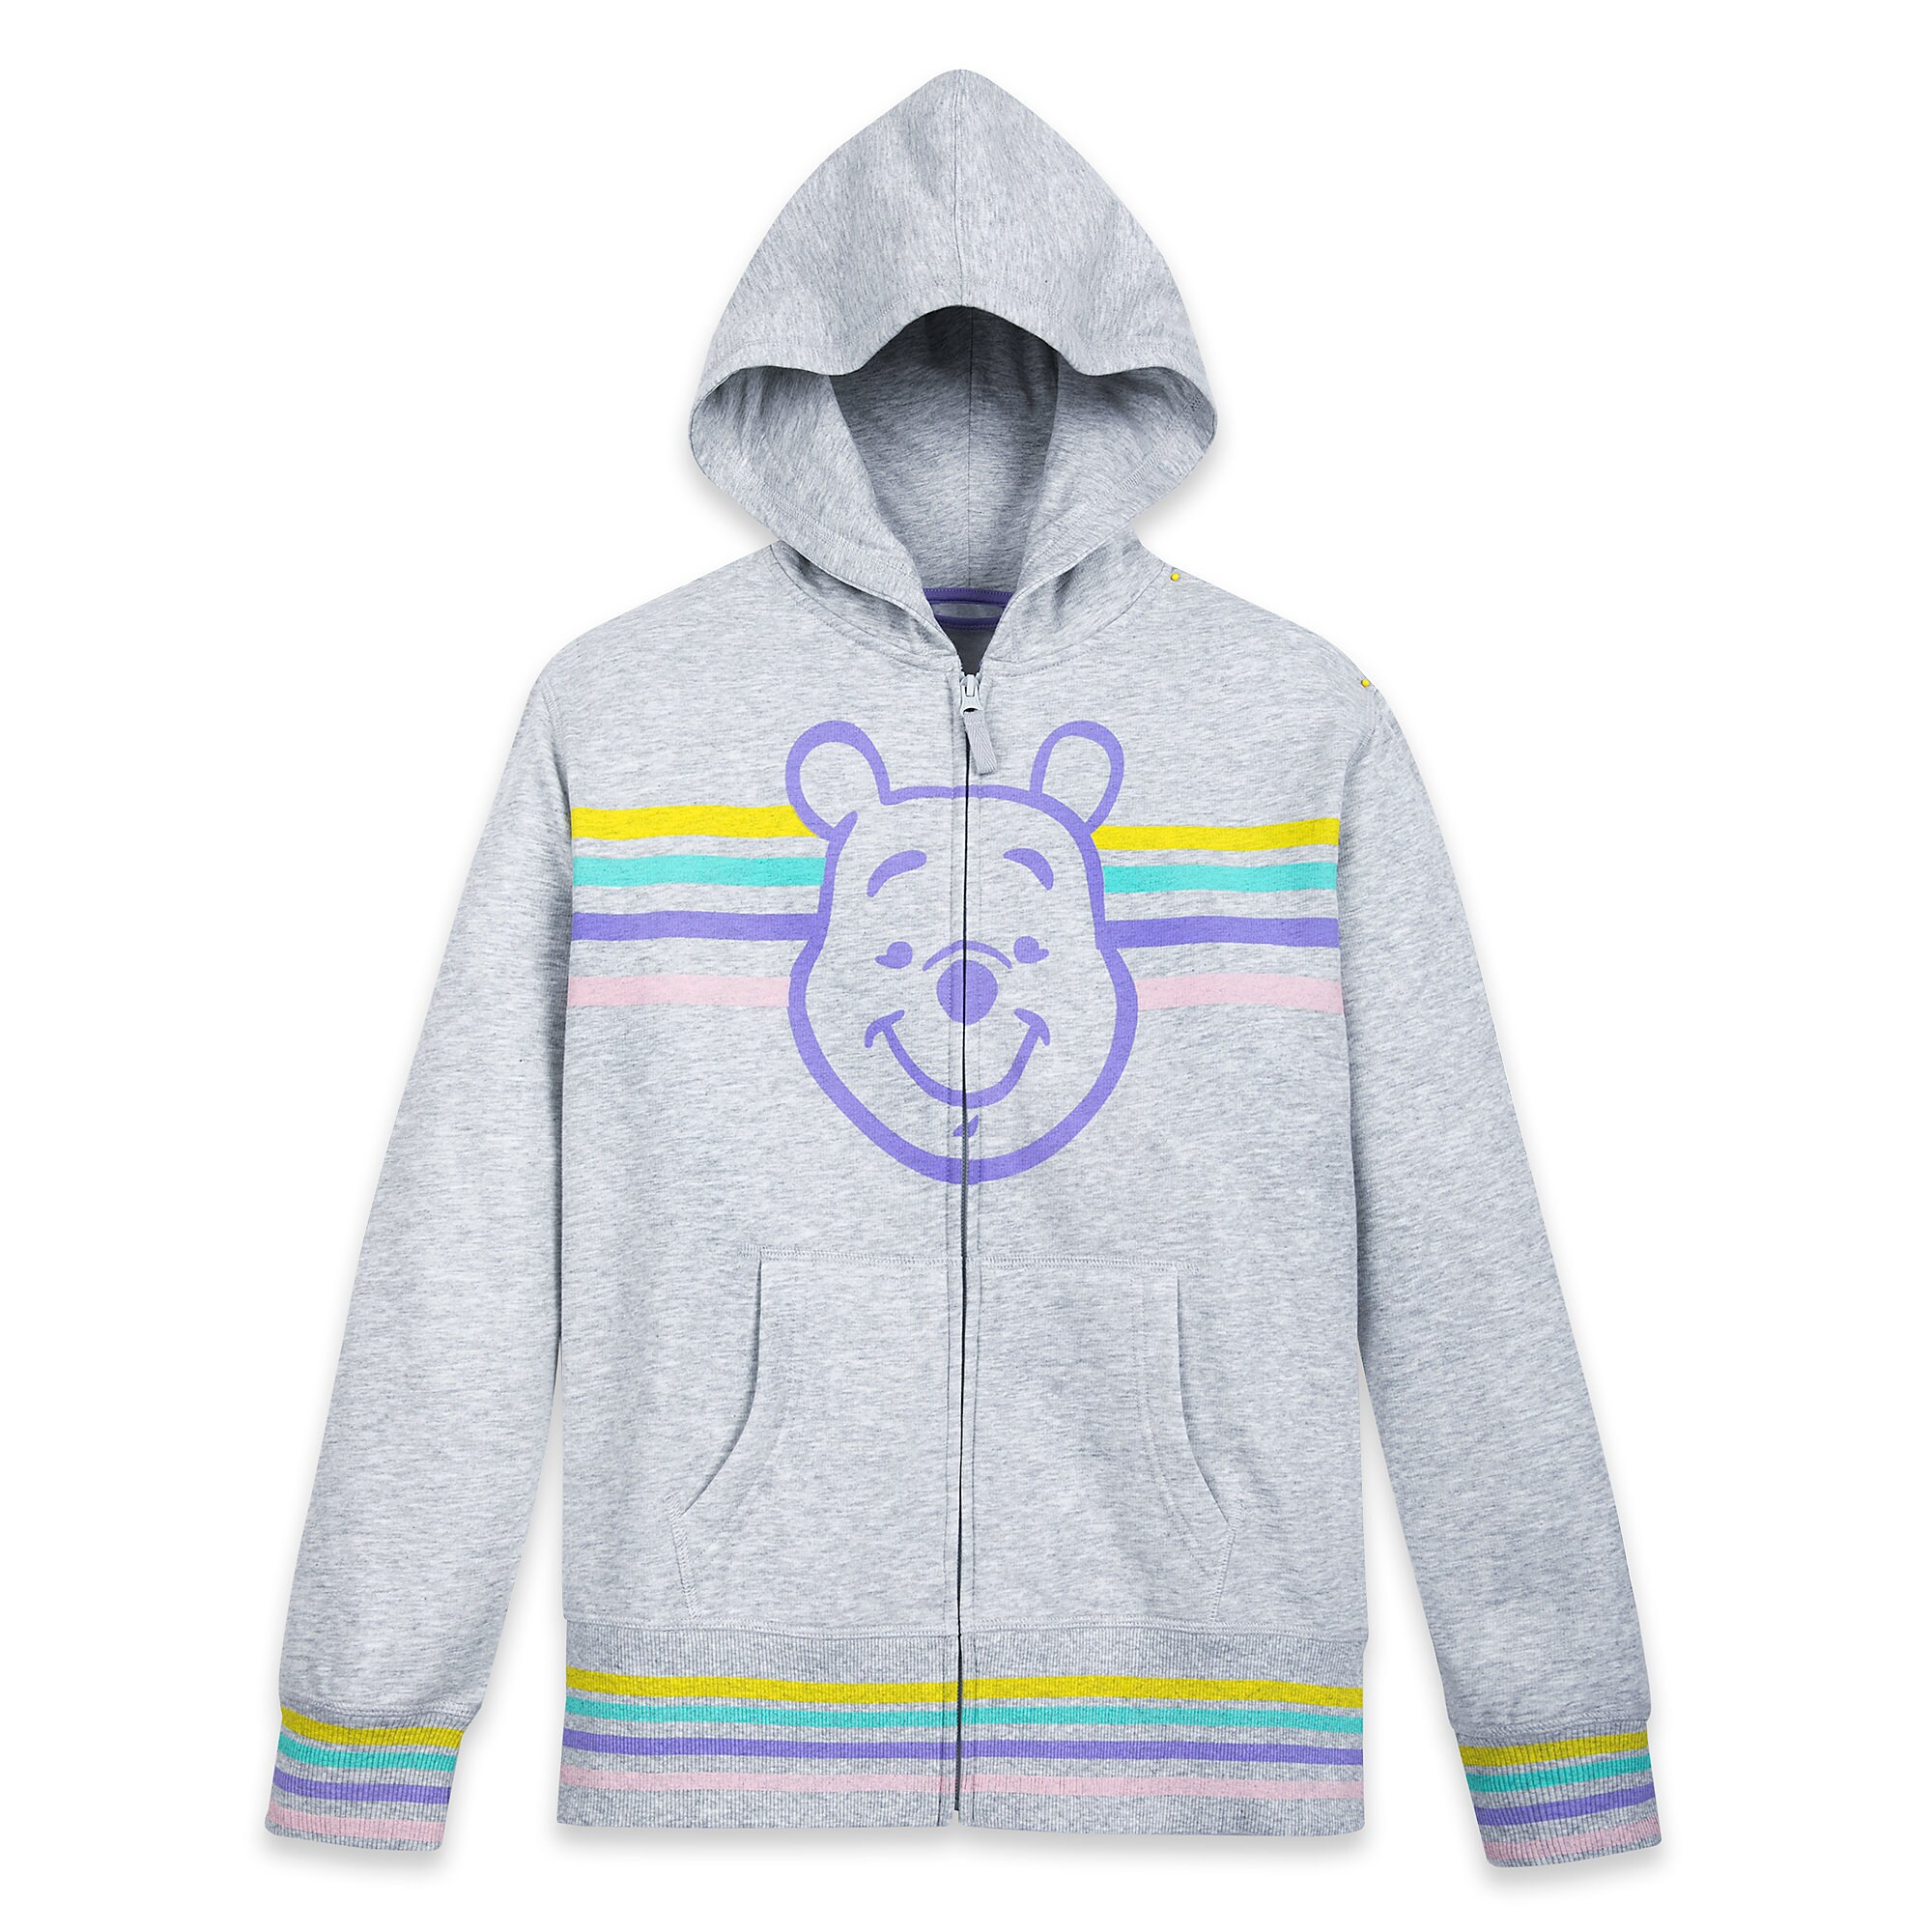 Winnie the Pooh Zip-Up Hoodie for Adults - Personalized